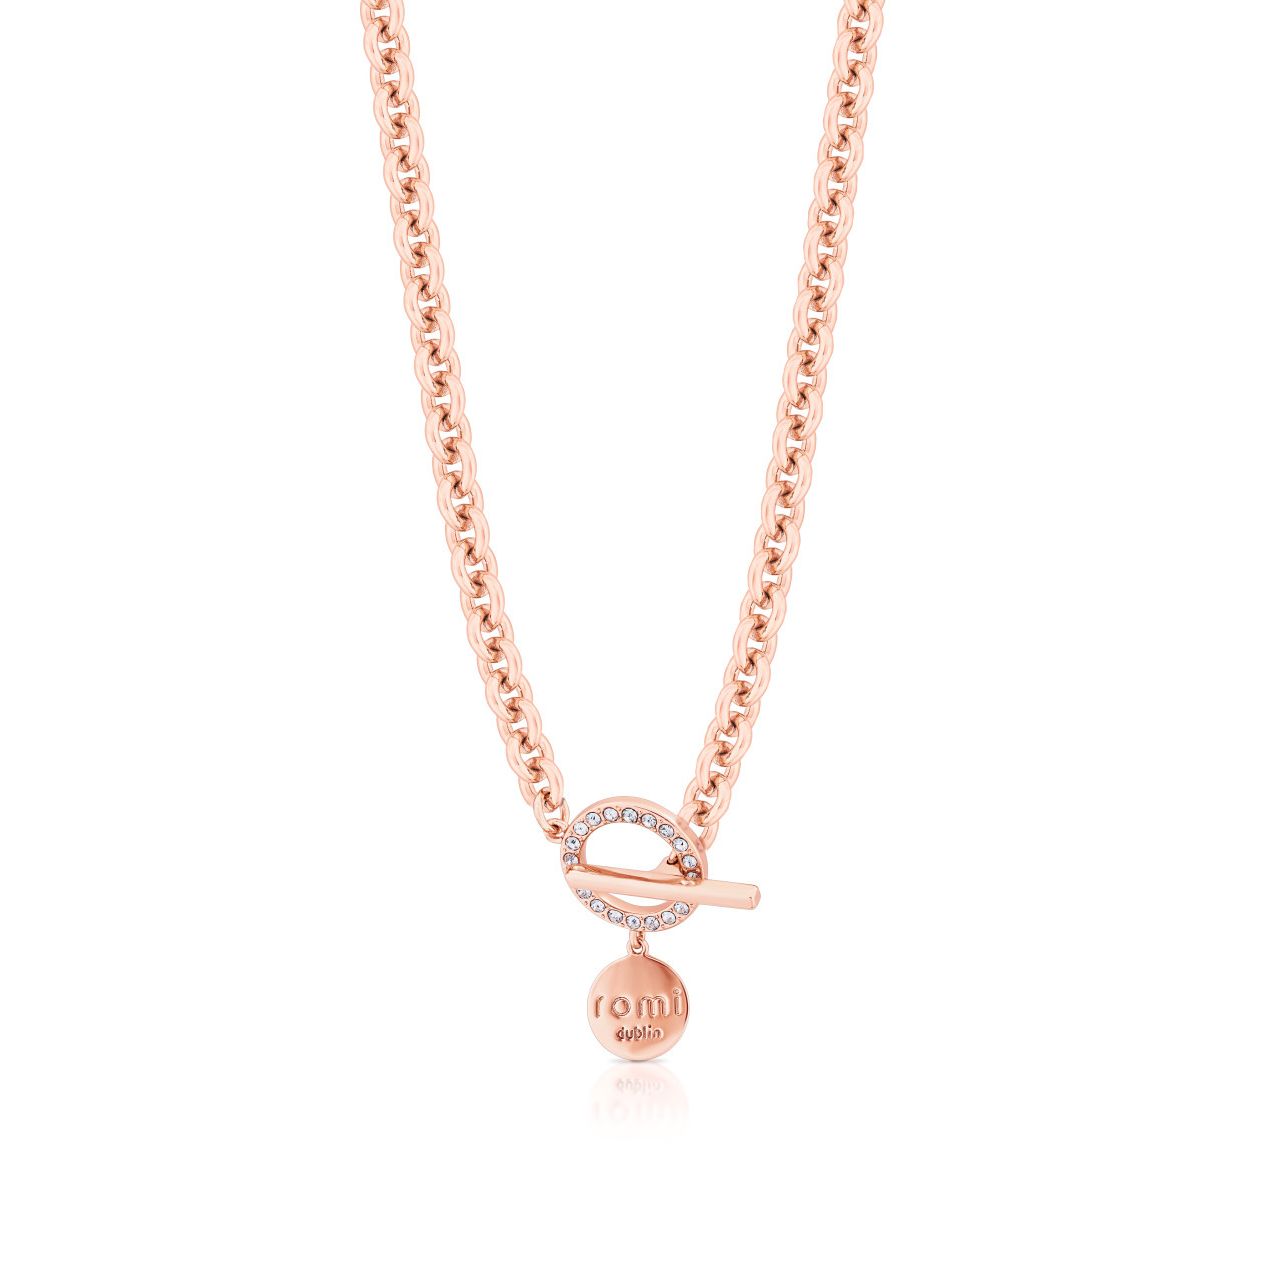 Tipperary Crystal Romi Dublin Rose Gold Chain Bar Necklace  Utilitarian links give a rock chic inspired look to this collection, sure to make you stand out from the crowd as an individual and unique soul.